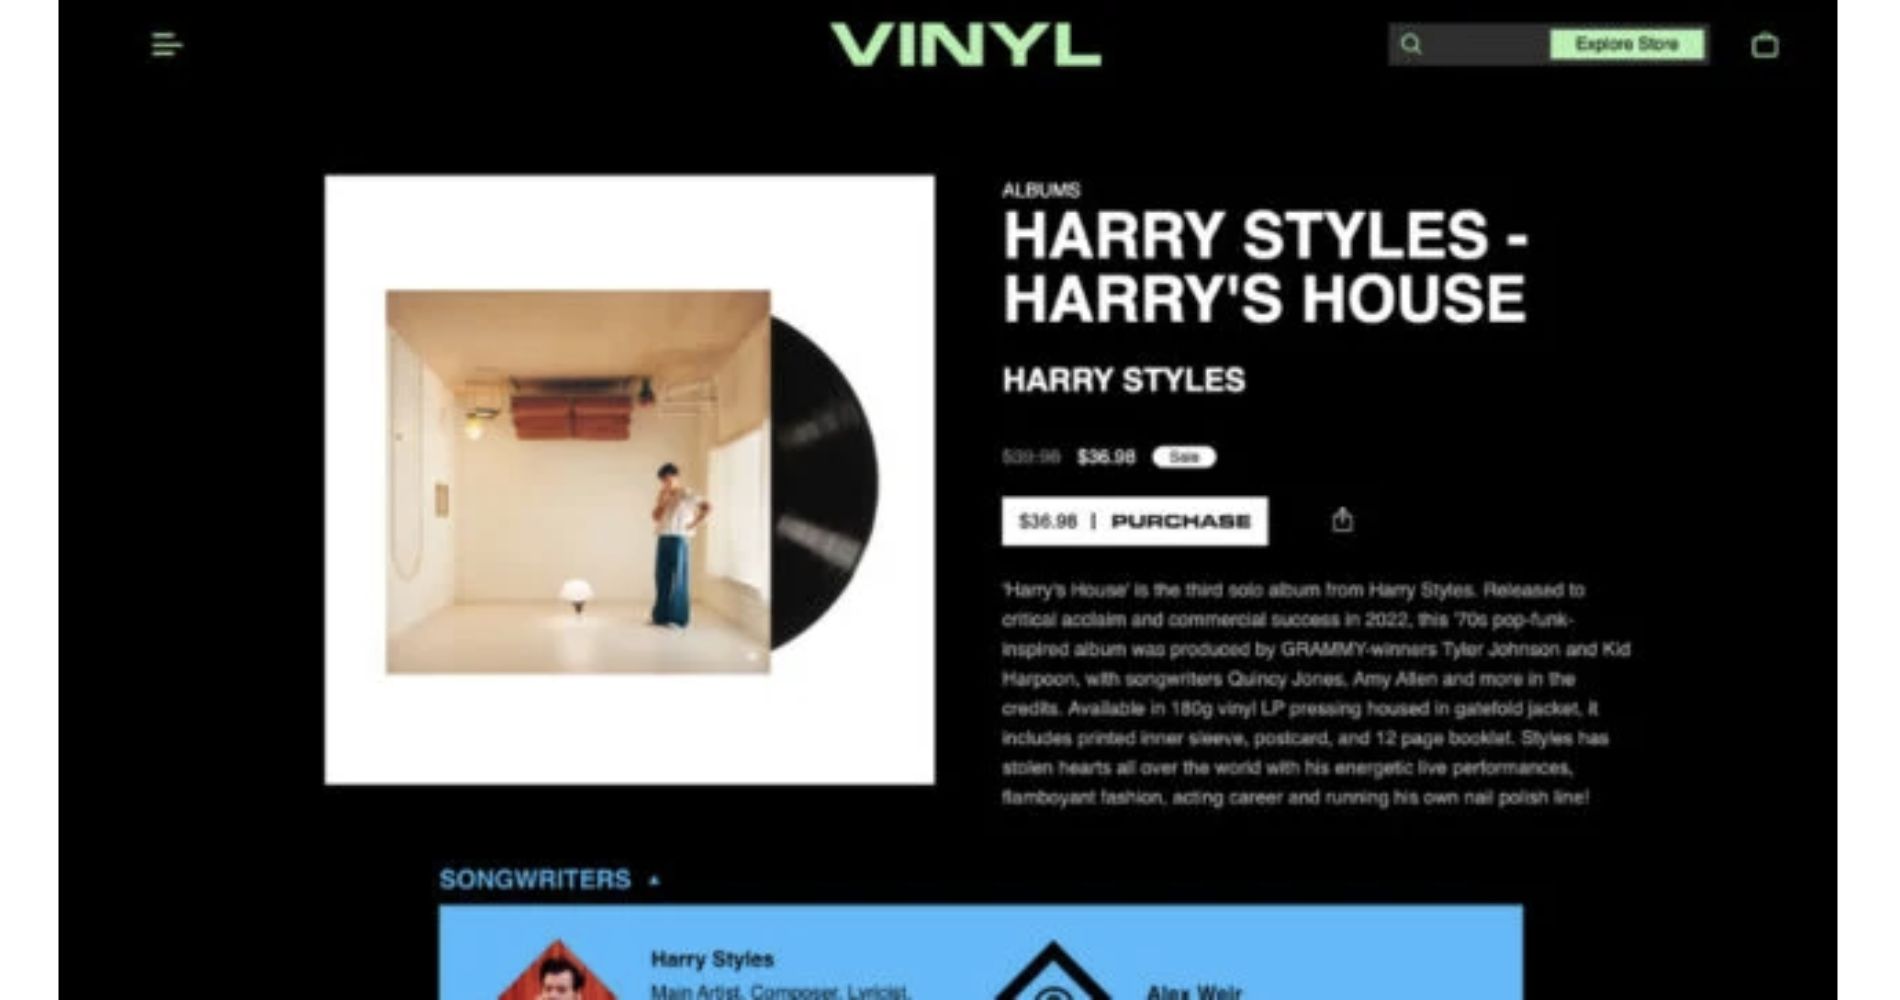 Jaxsta Expands It's Services With The Launch of Vinyl.com, A